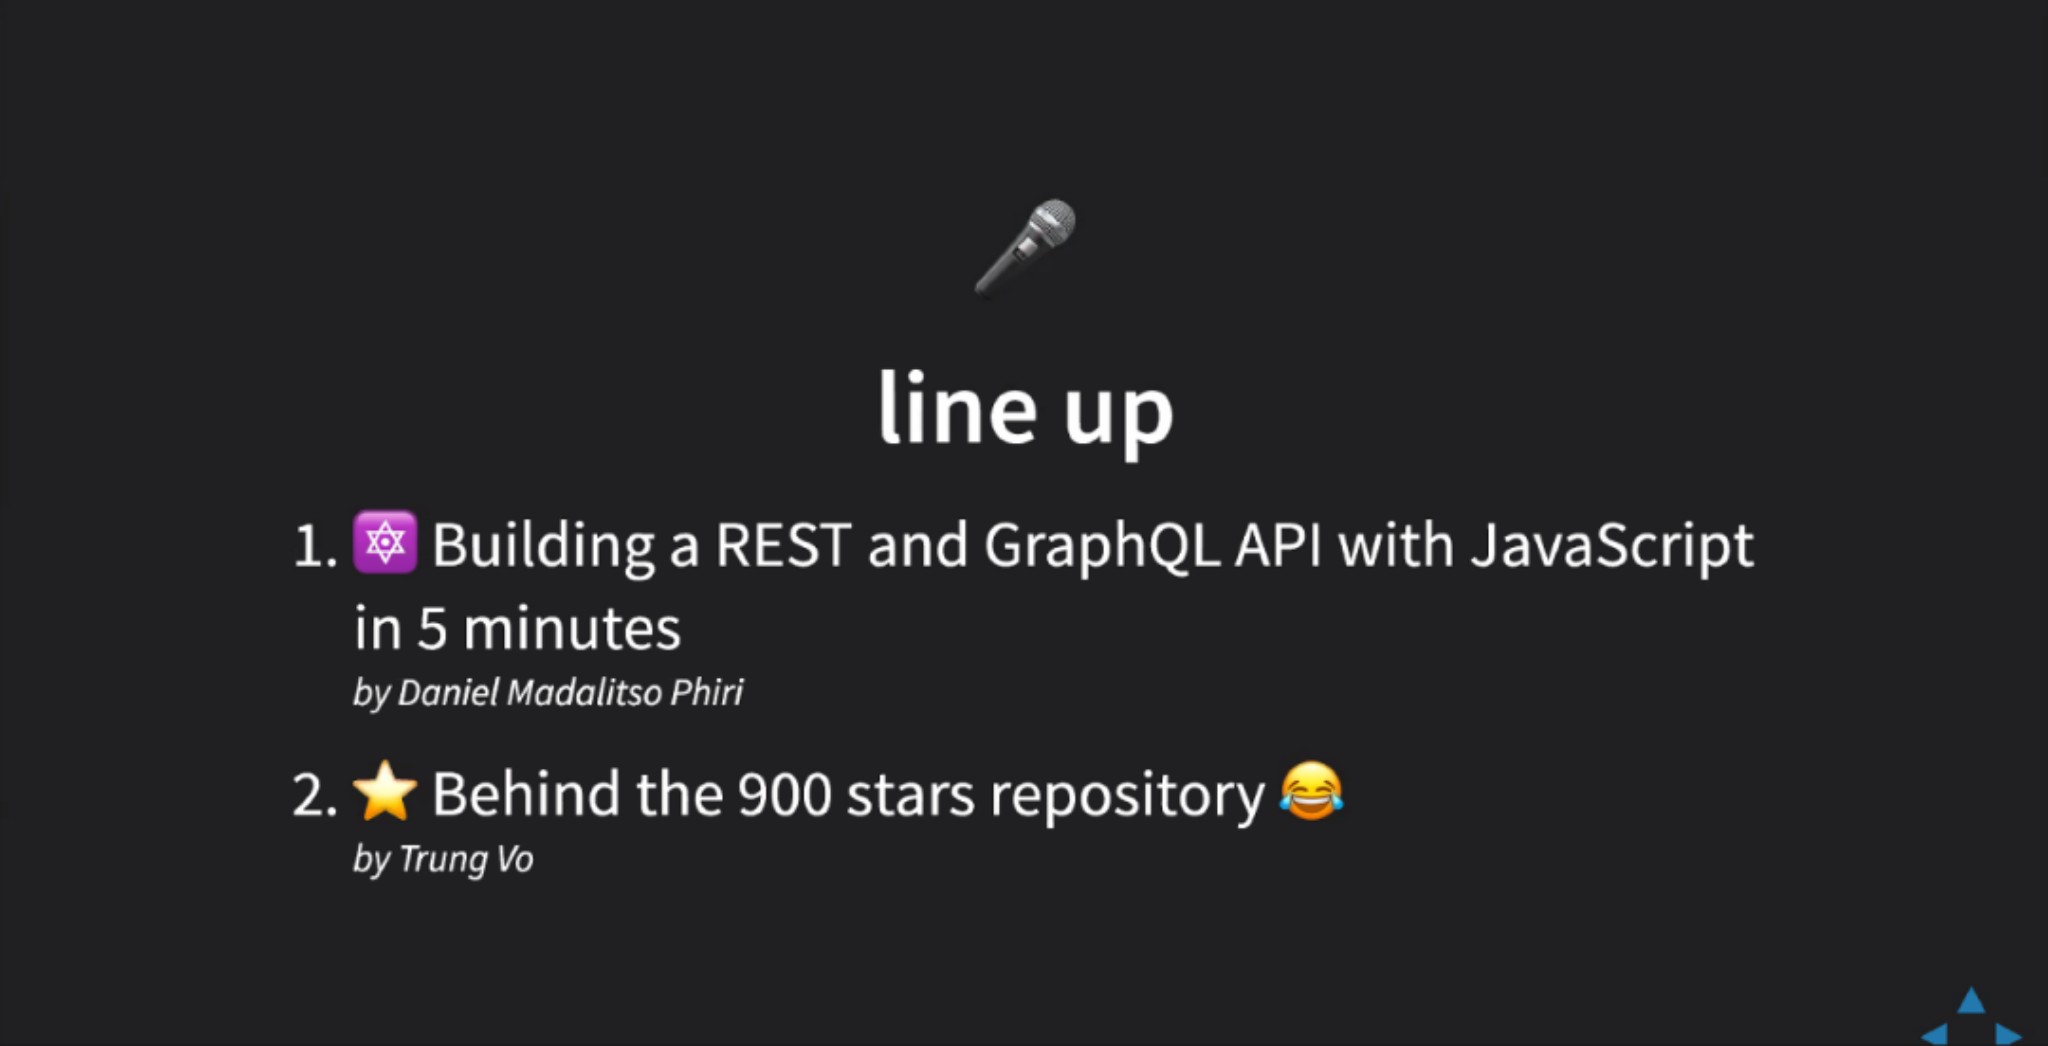 Behind the 900 stars repository